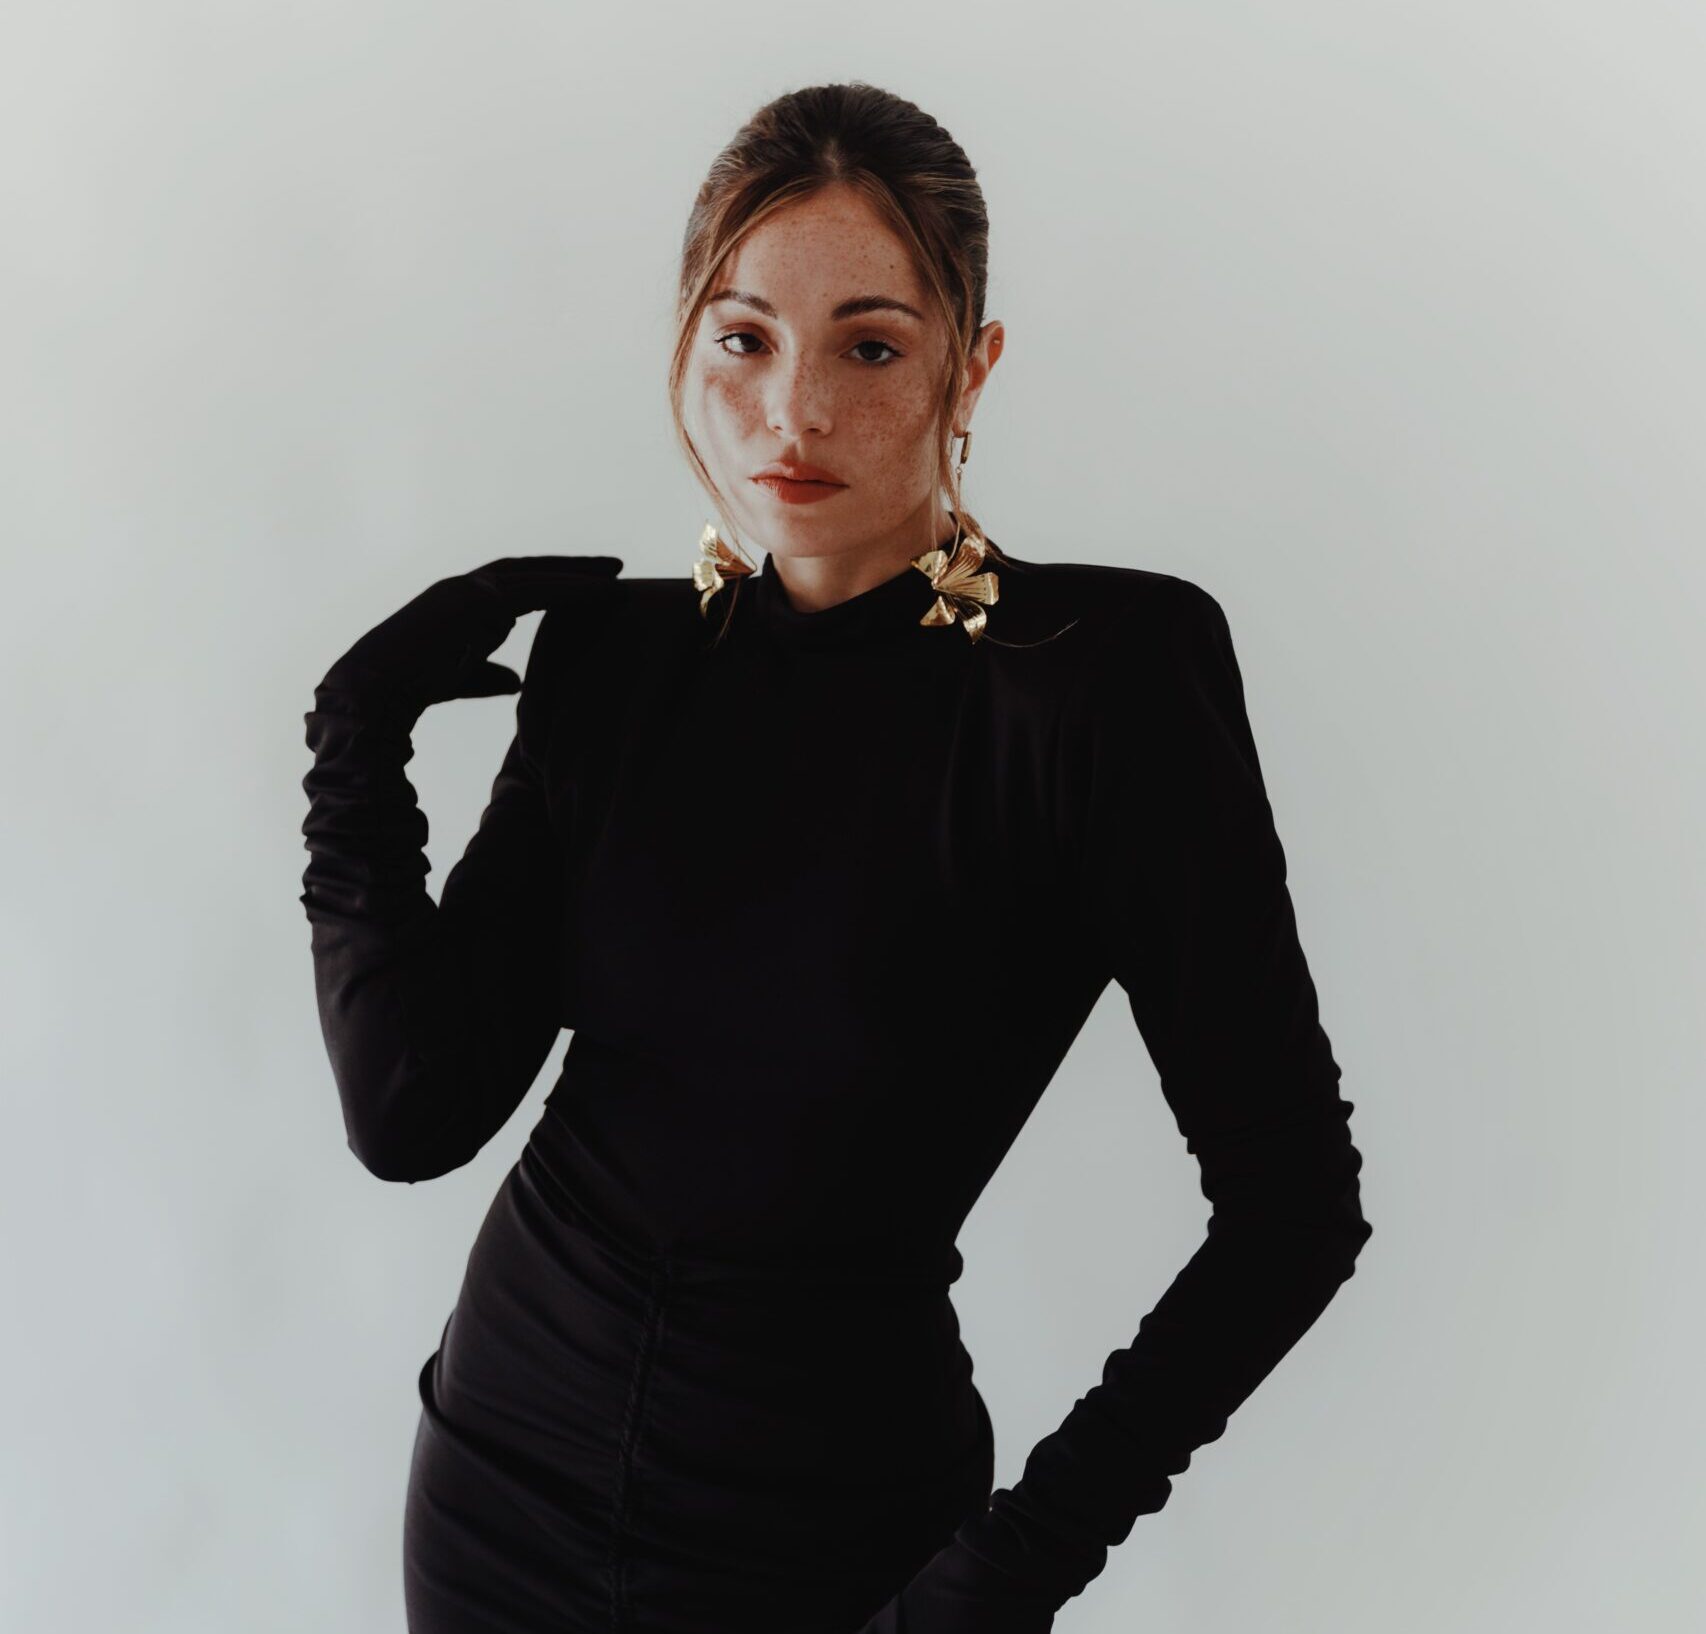 Juliana Aidén Martinez, dressed in an elegant black turtleneck, poses confidently with her hand on her hip. The striking golden earrings add a touch of opulence to her outfit, complementing her self-assured demeanor against a plain white background.